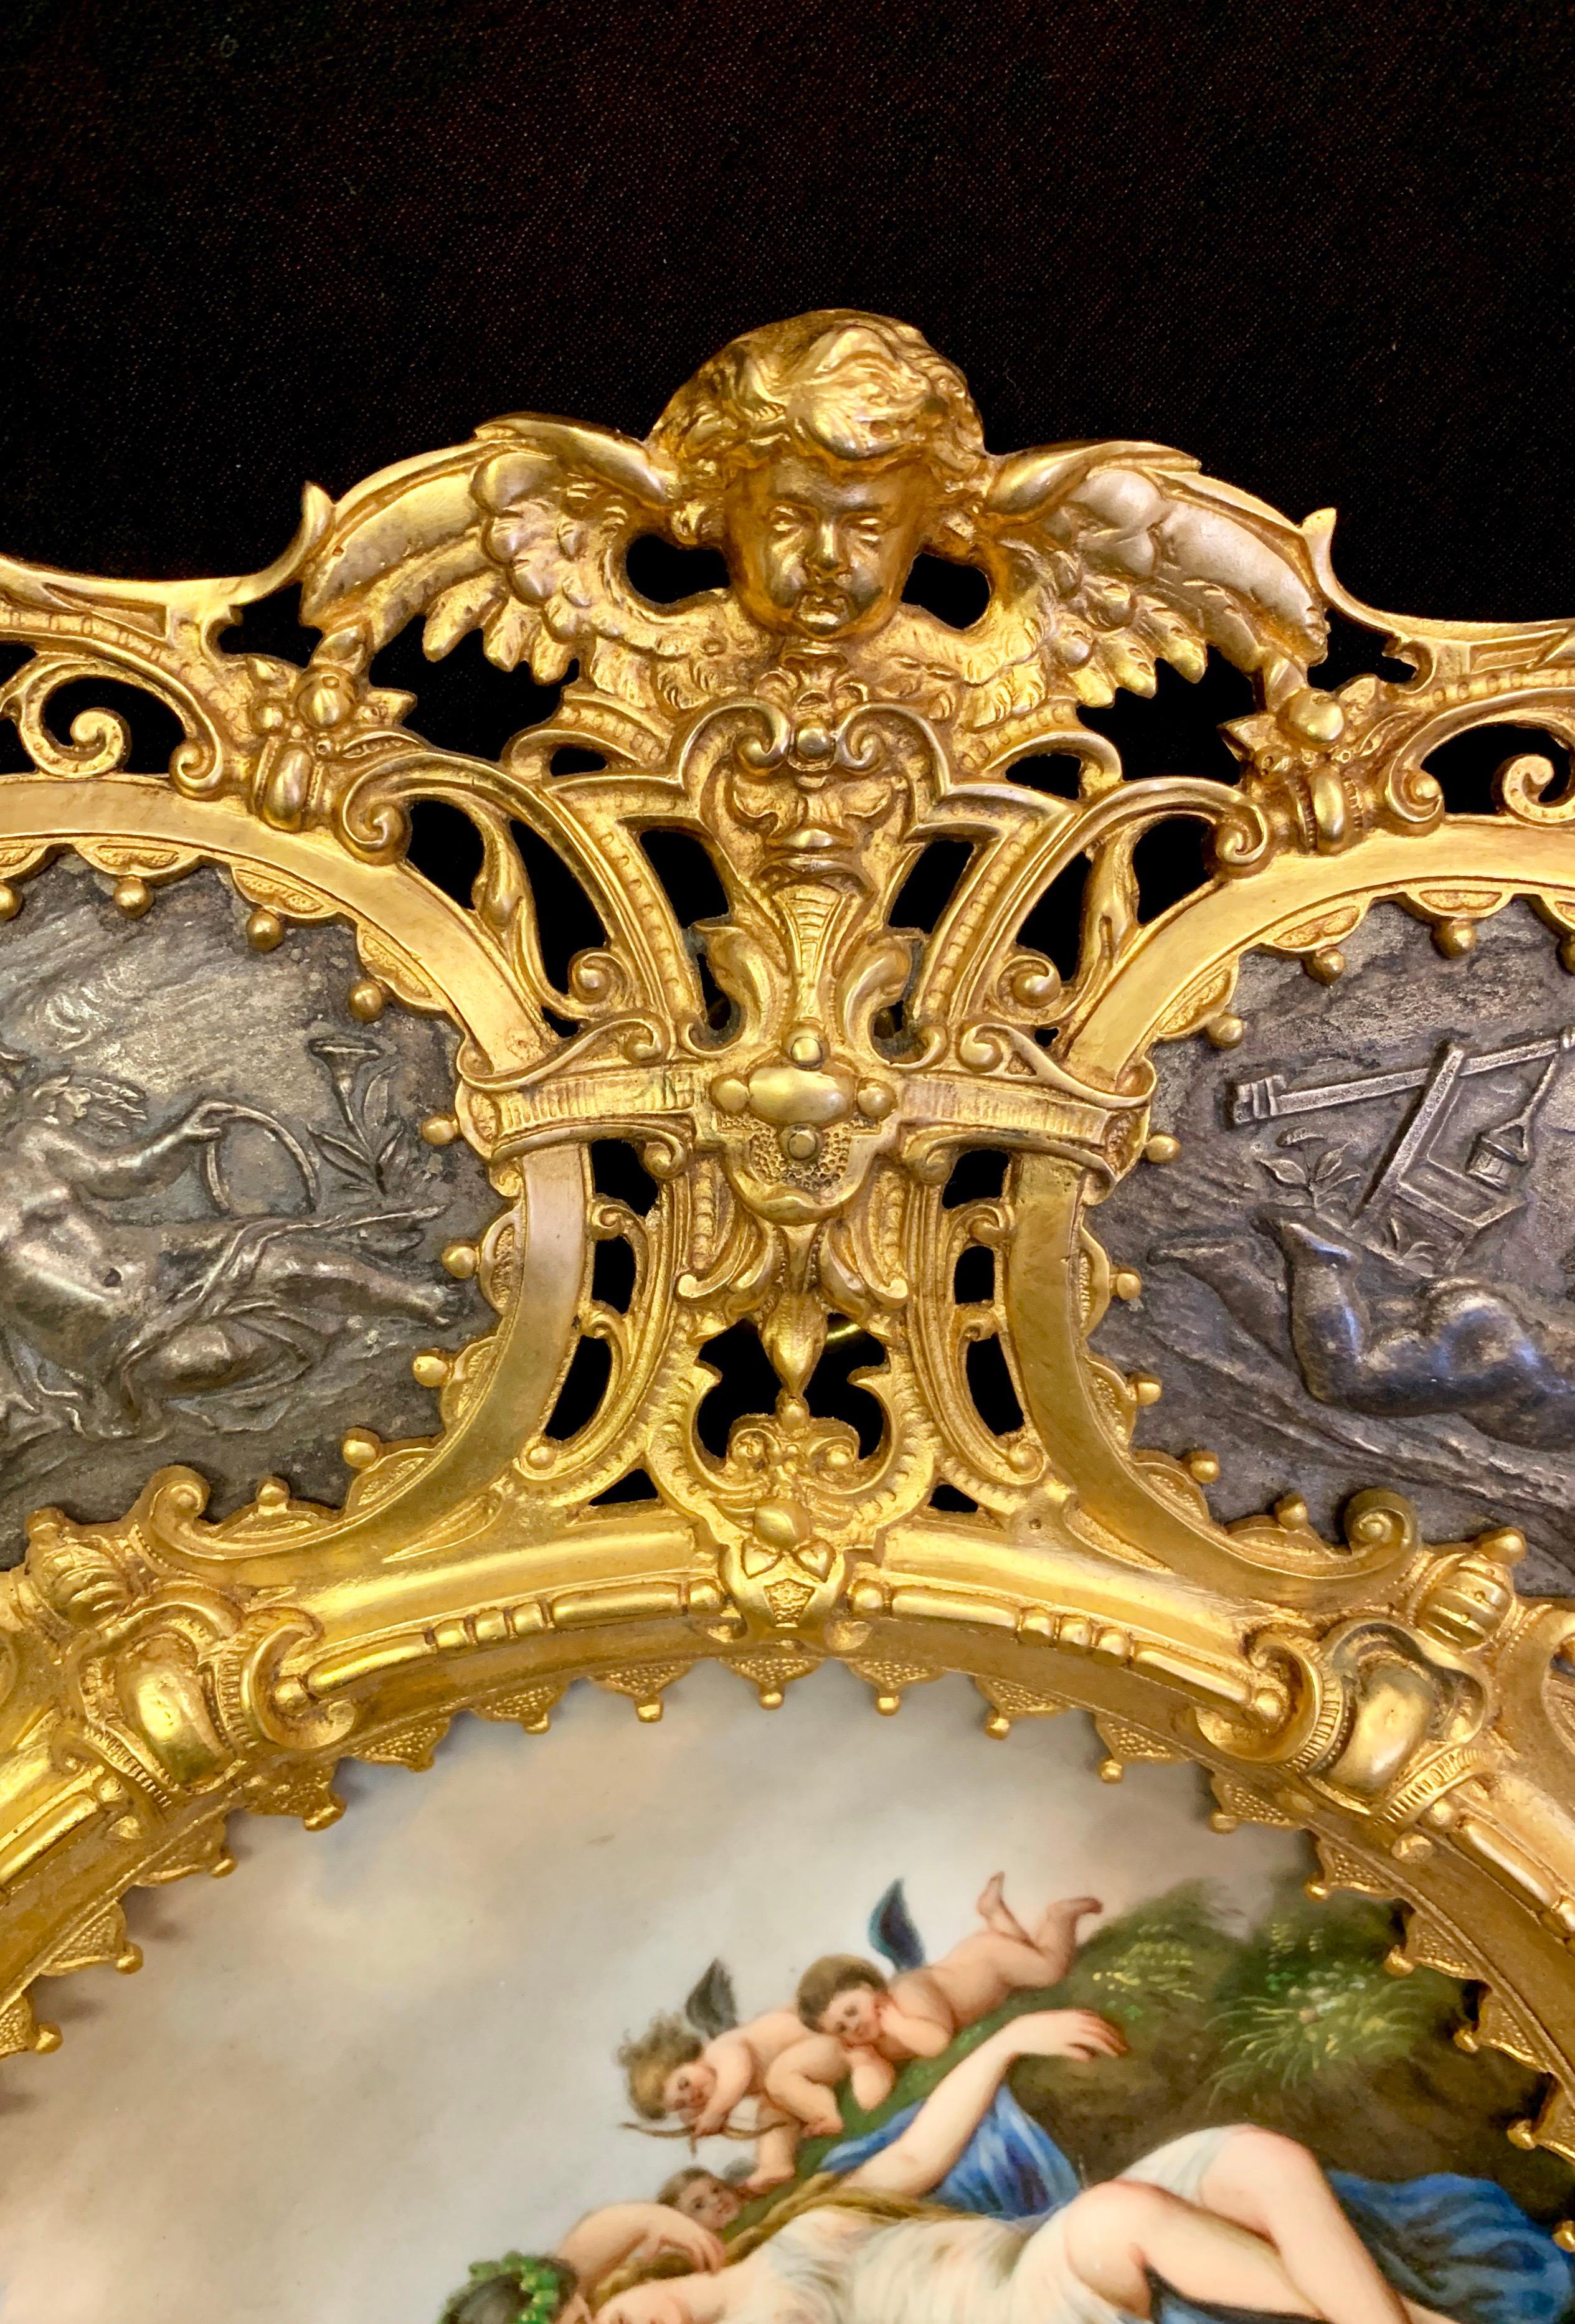 19th Century Porcelain Plate in a Gilt Bronze Frame In Excellent Condition For Sale In Los Angeles, CA